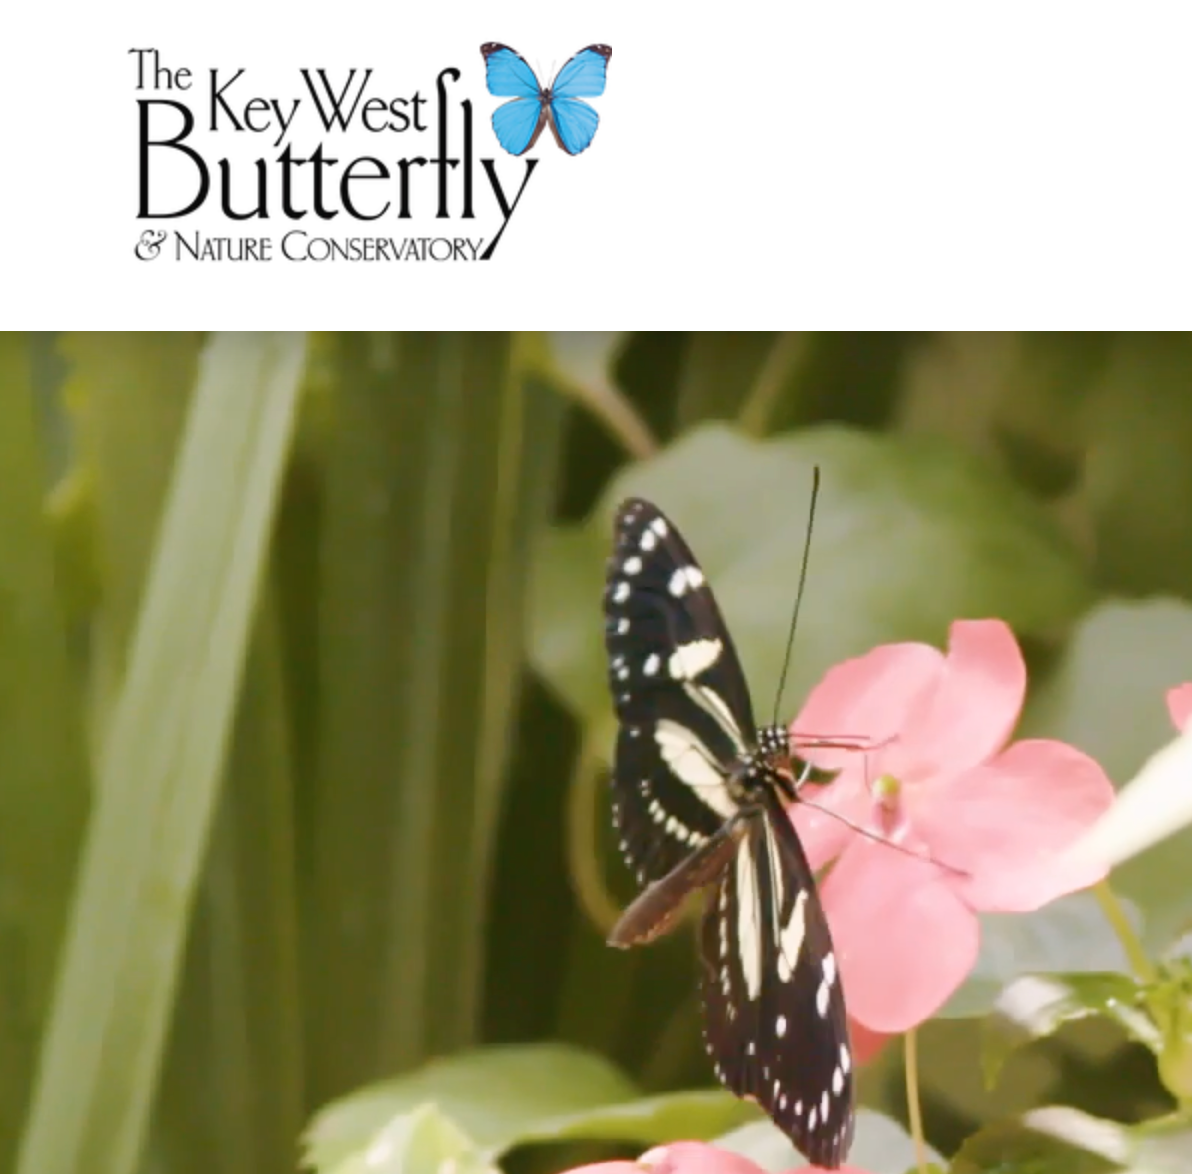 Episode 24 - The Key West Butterfly & Nature Conservatory with George Fernandez